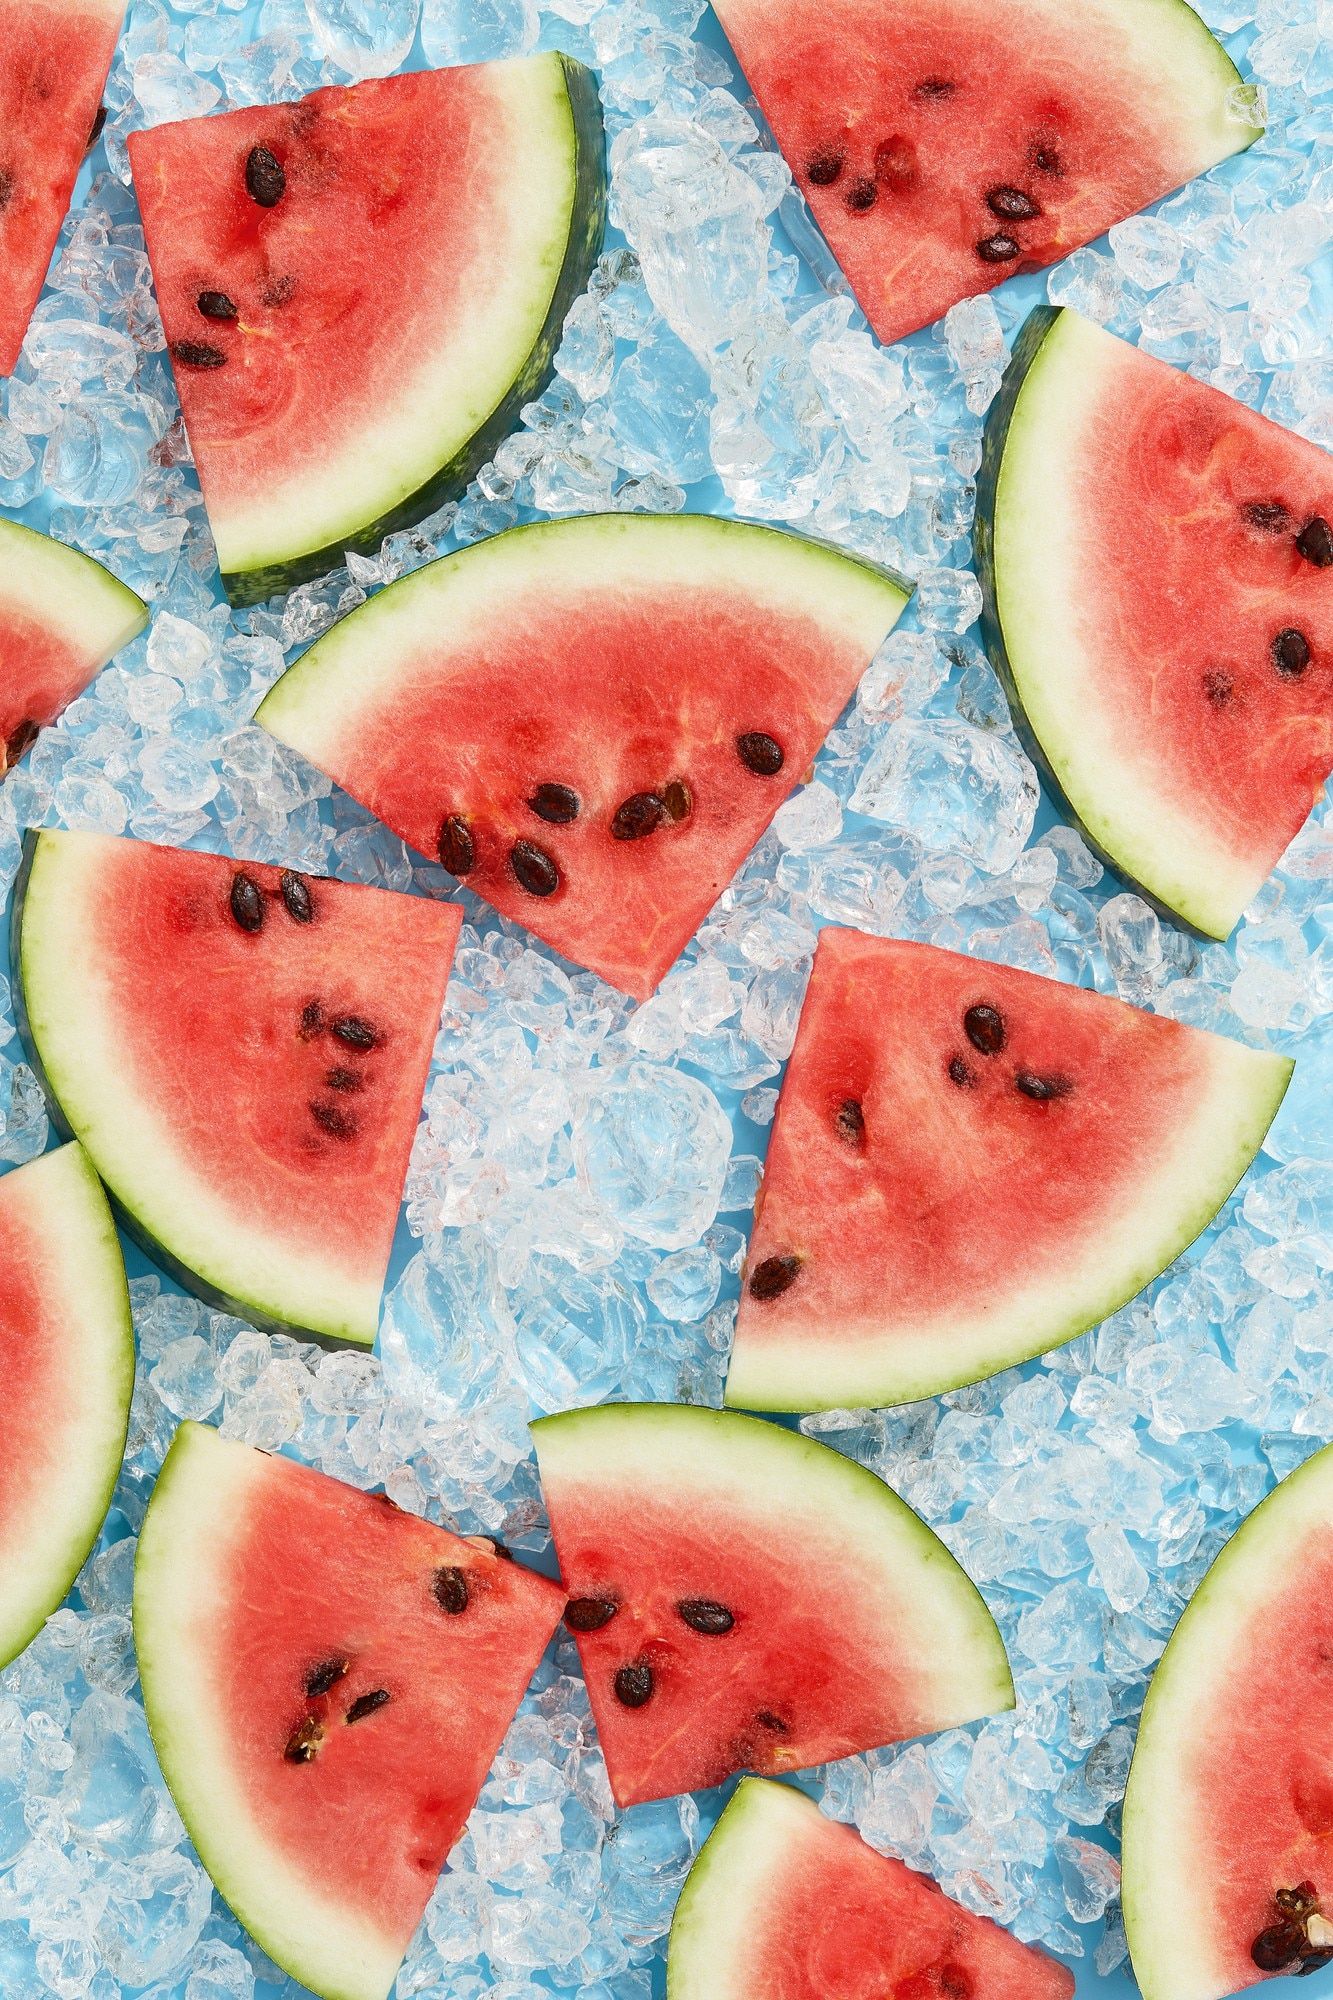 A watermelon is cut into slices and placed on ice - Watermelon, fruit, summer